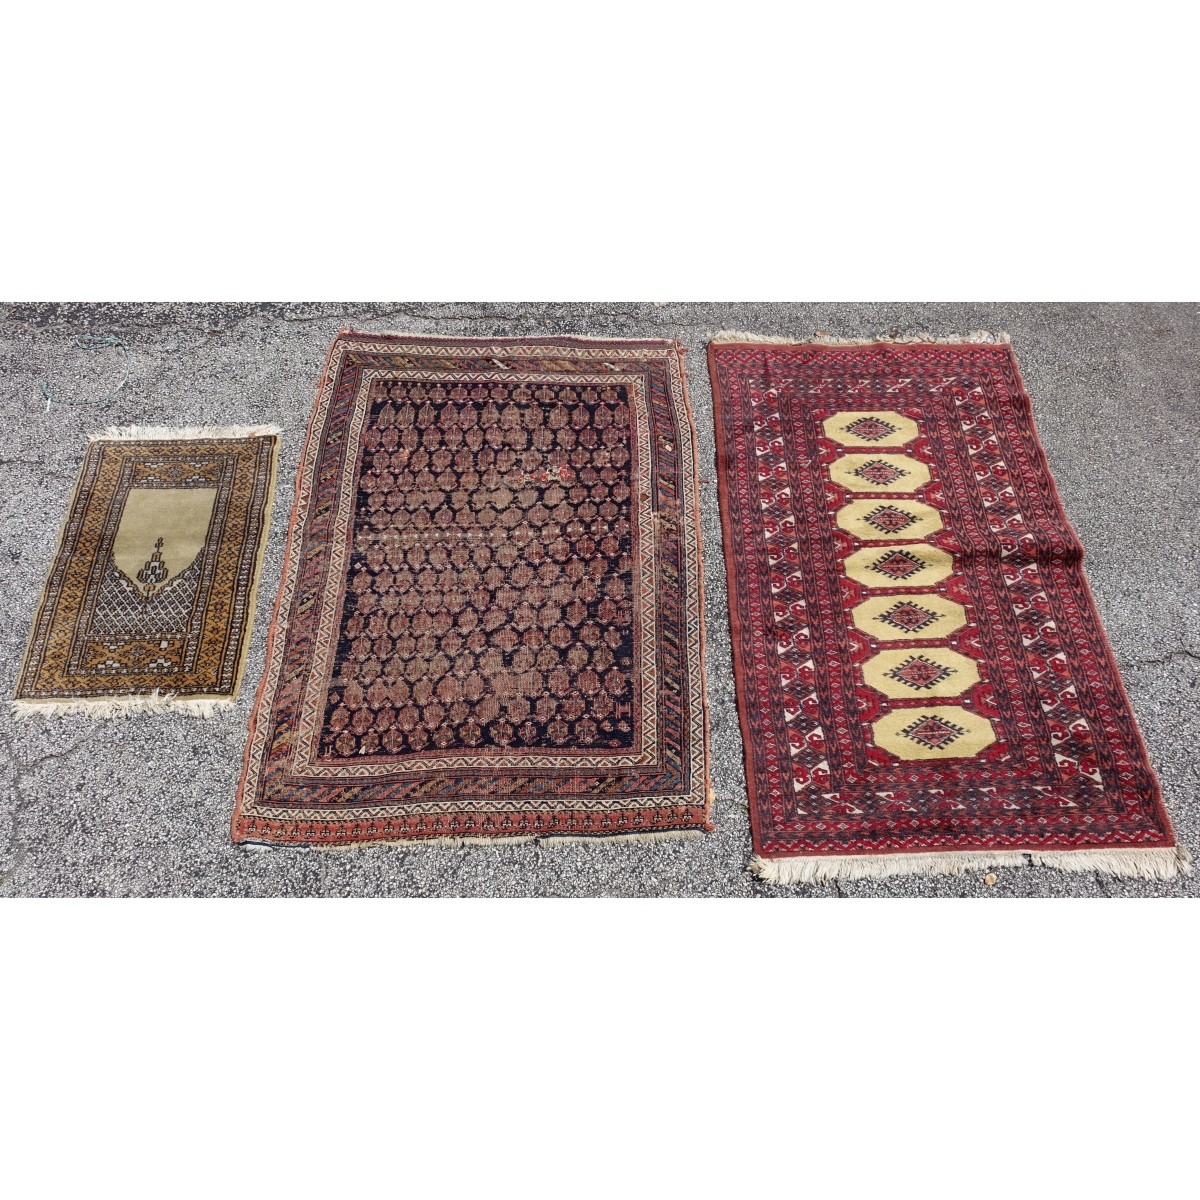 Three (3) Middle Eastern Rugs